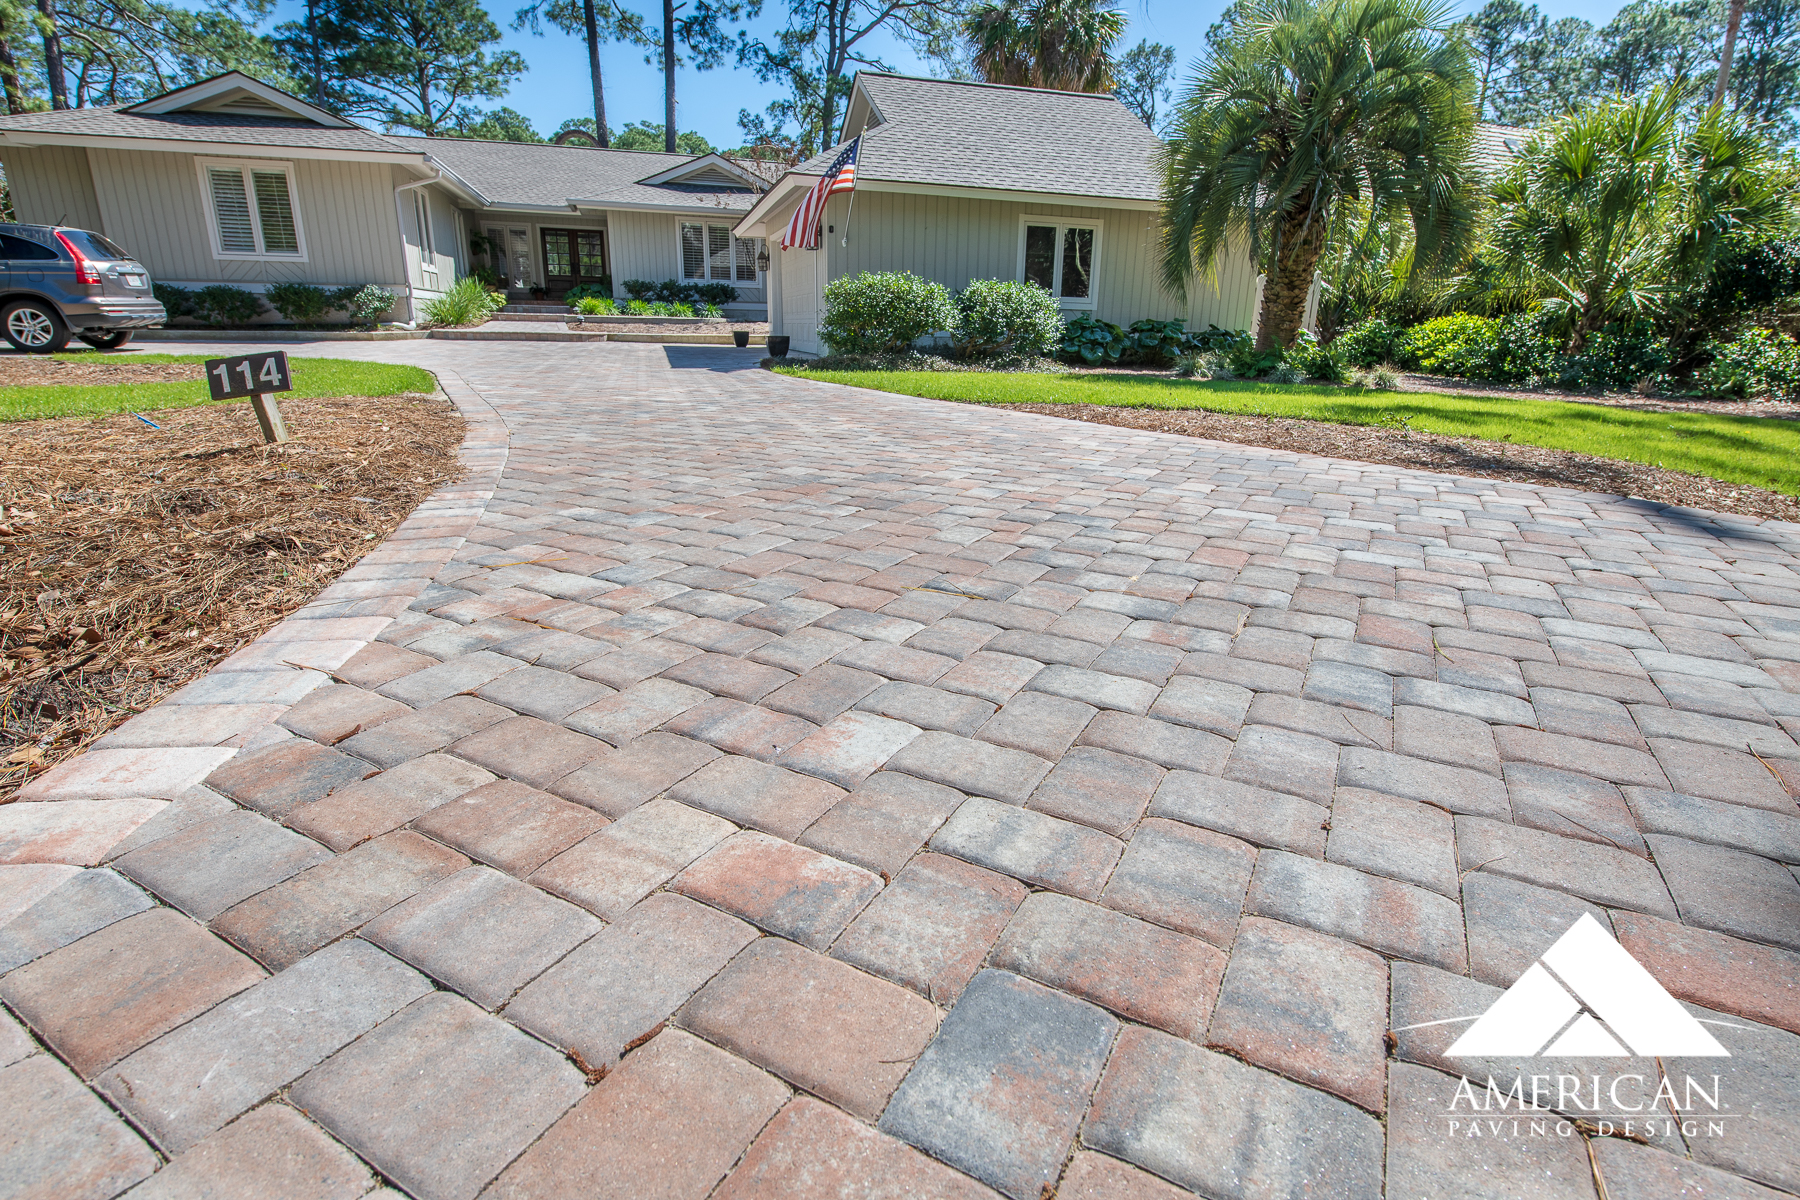 Cost To Install A Paver Driveway Average Cost To Install A Brick Paver Driveway Savannah Georgia American Paving Design